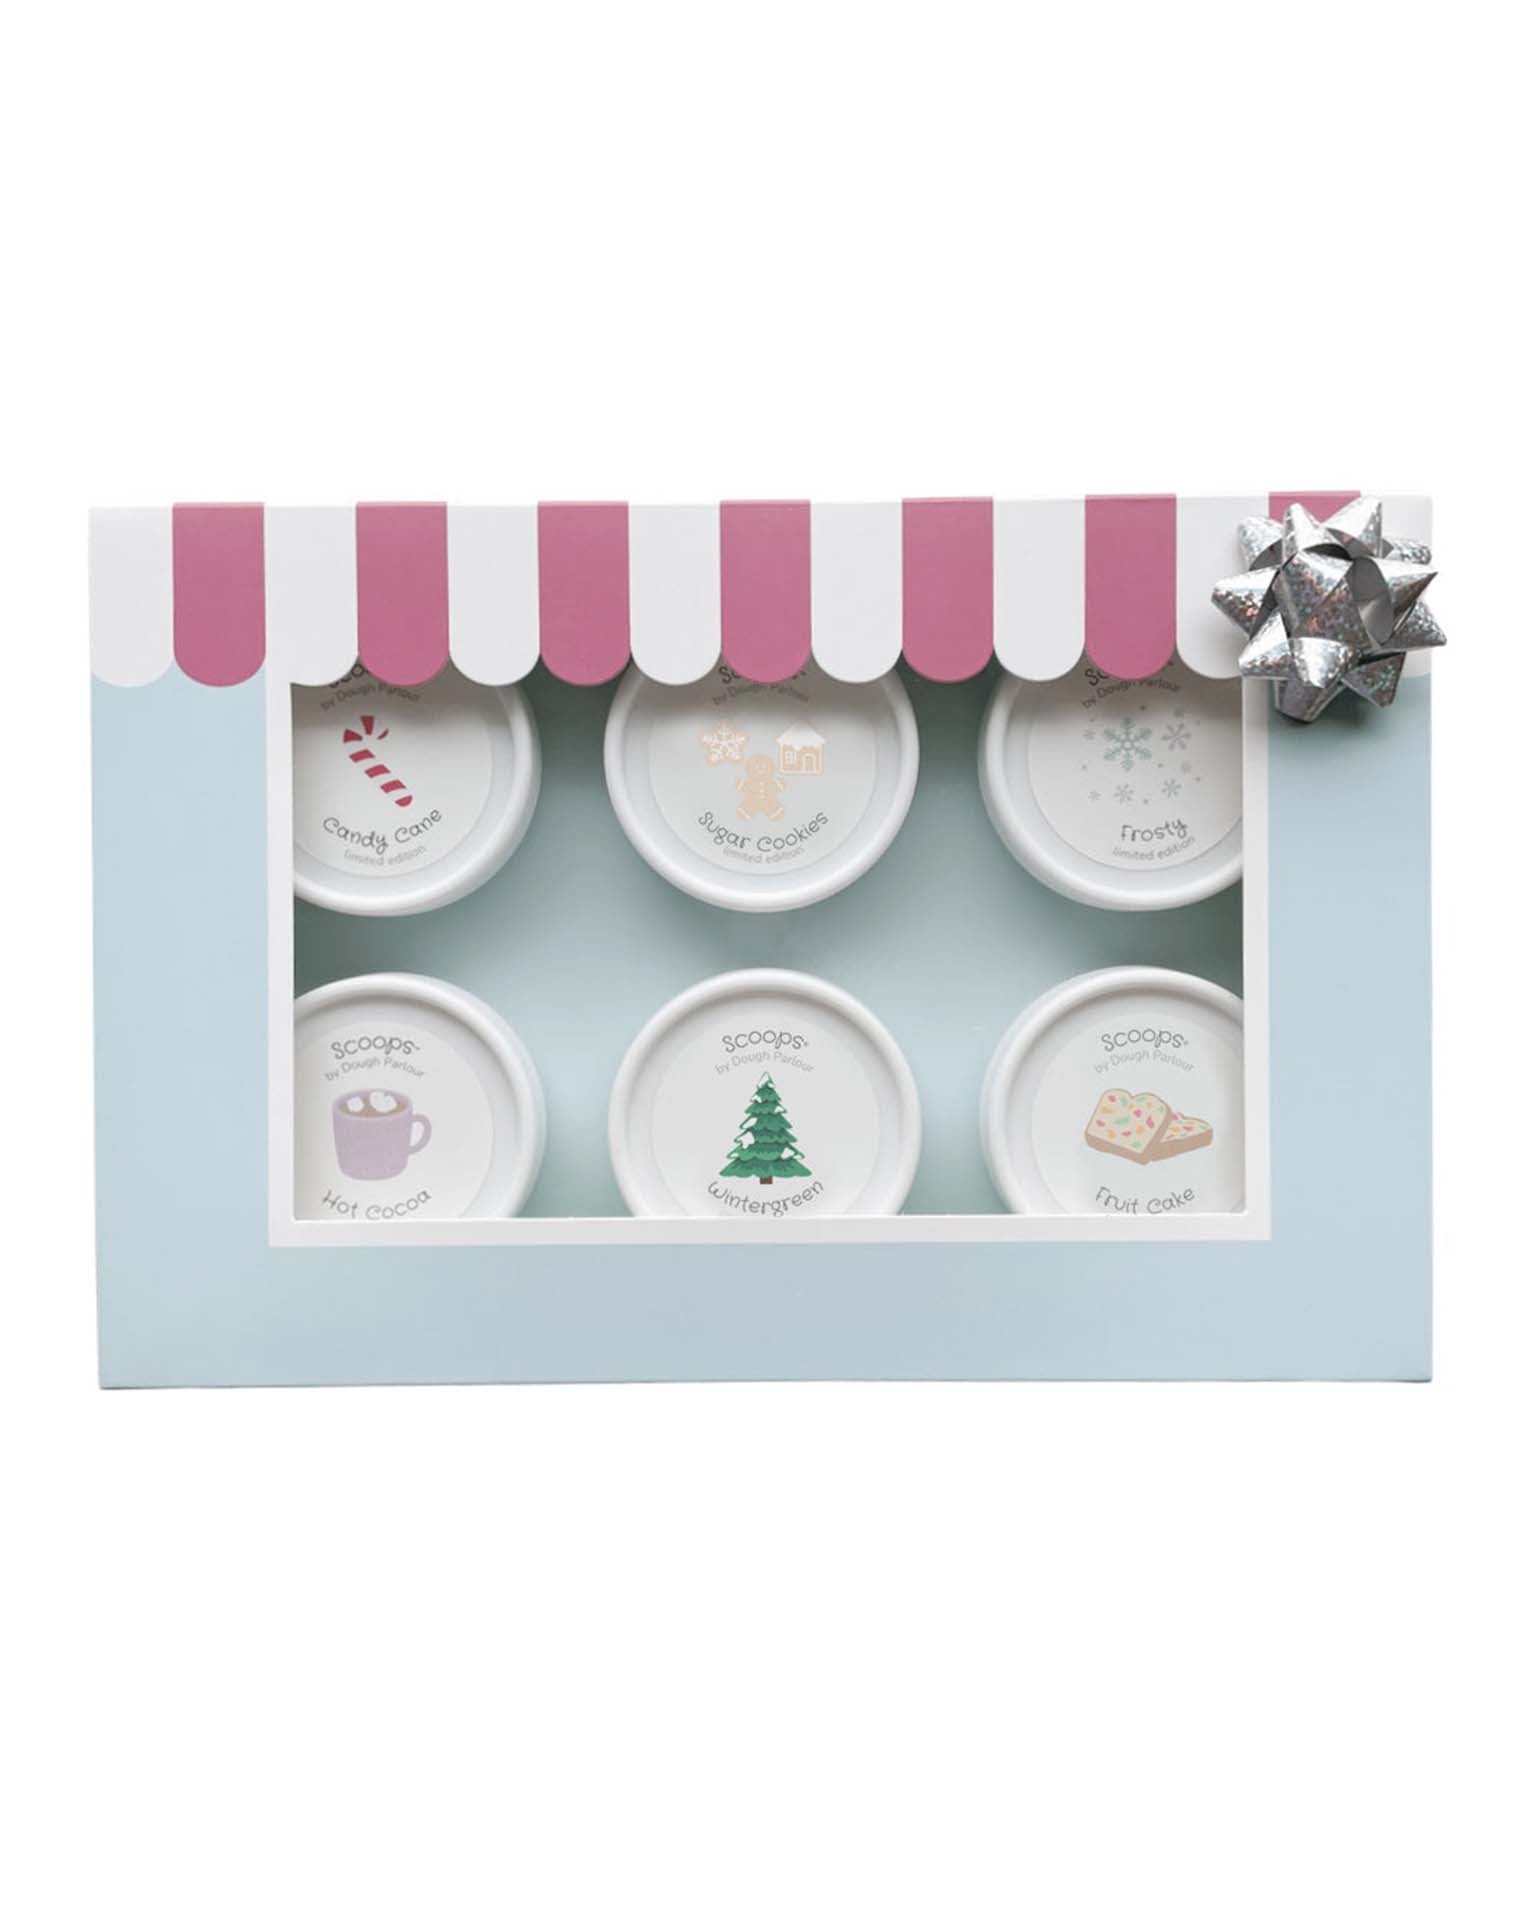 Little the dough parlour play holiday parlour pack